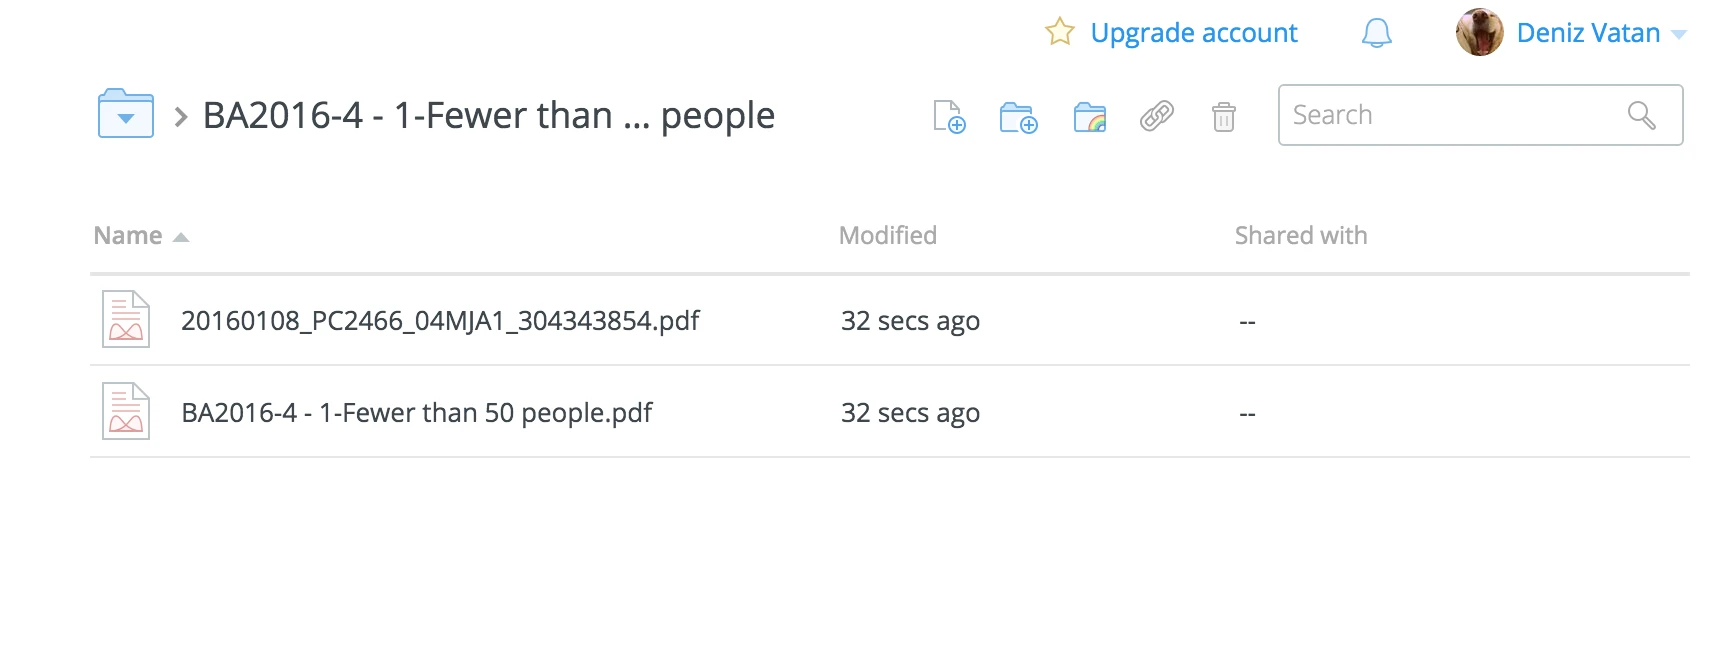 DropBox Integration: Request to reinstate the ability to add Extended Folder Name on integration Screenshot 104